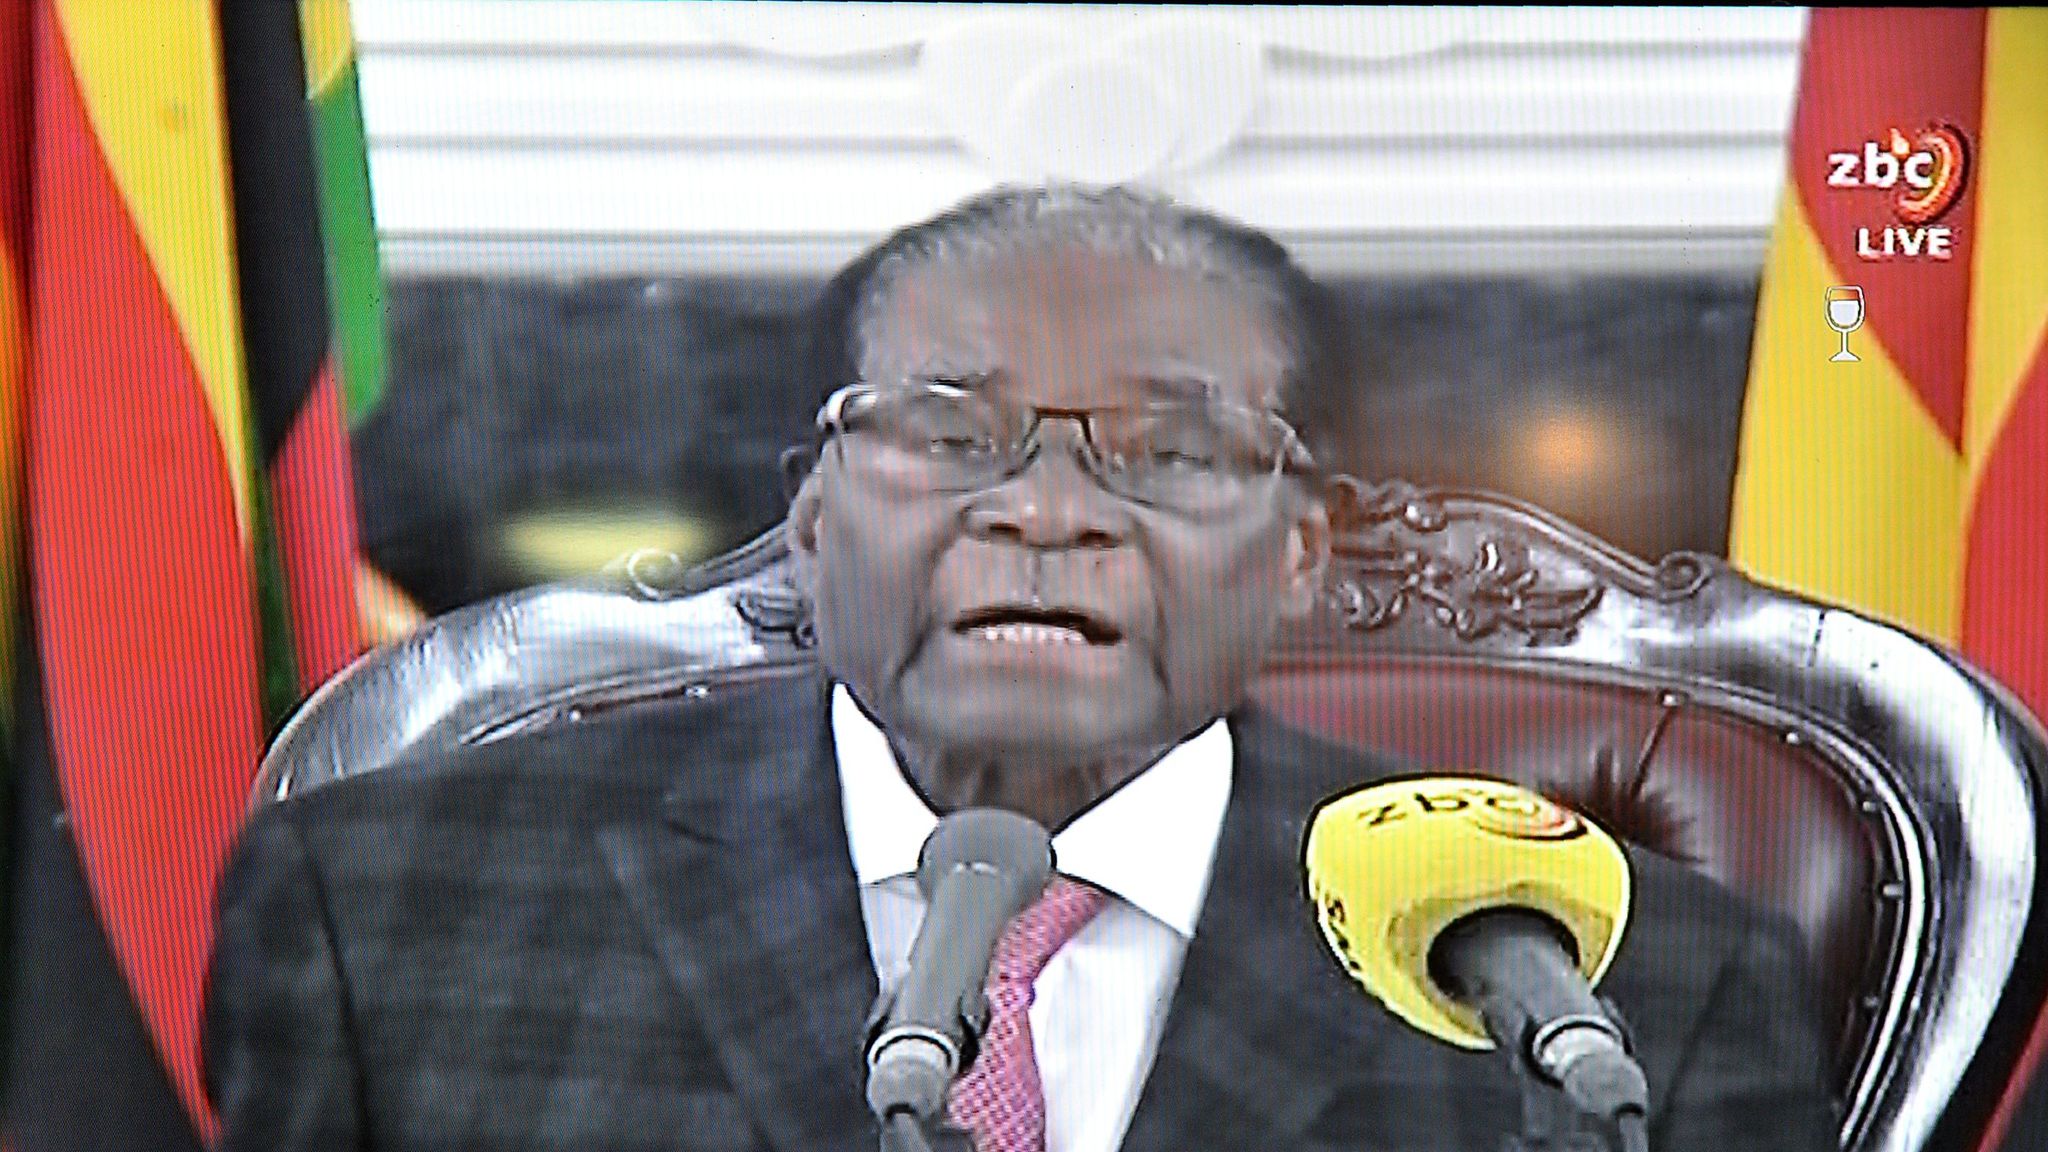 Robert Mugabe Quite Jovial Despite Being Forced From Office Nephew Says World News Sky News 